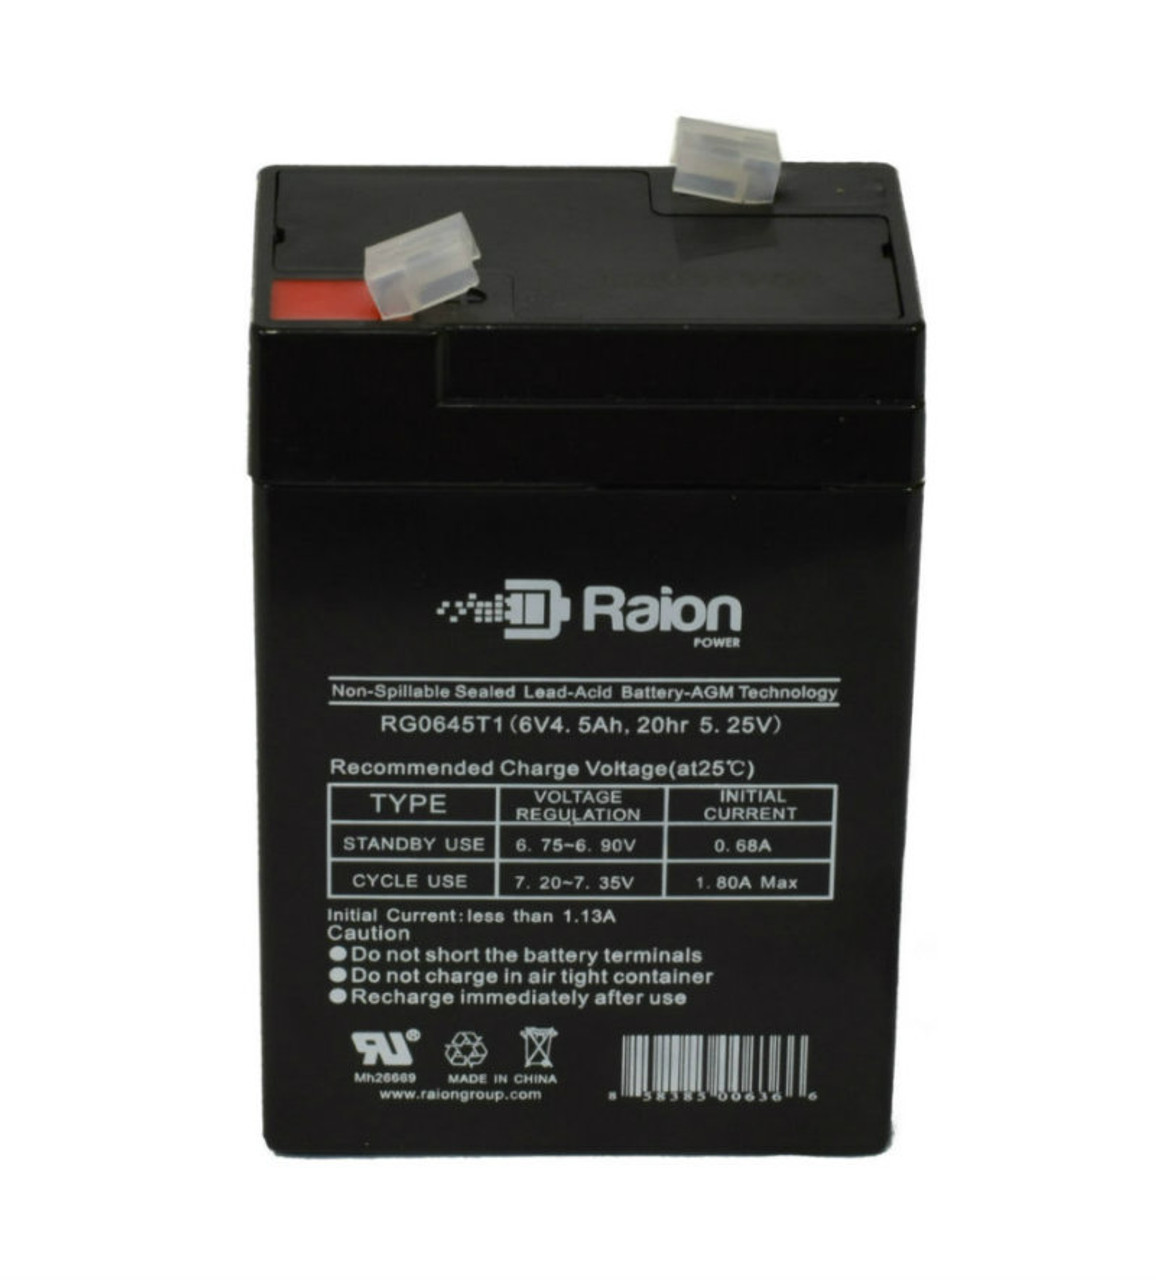 Raion Power RG0645T1 Replacement Battery Cartridge for Best Choice Products SKY4767 Bentley Ride-On - Black